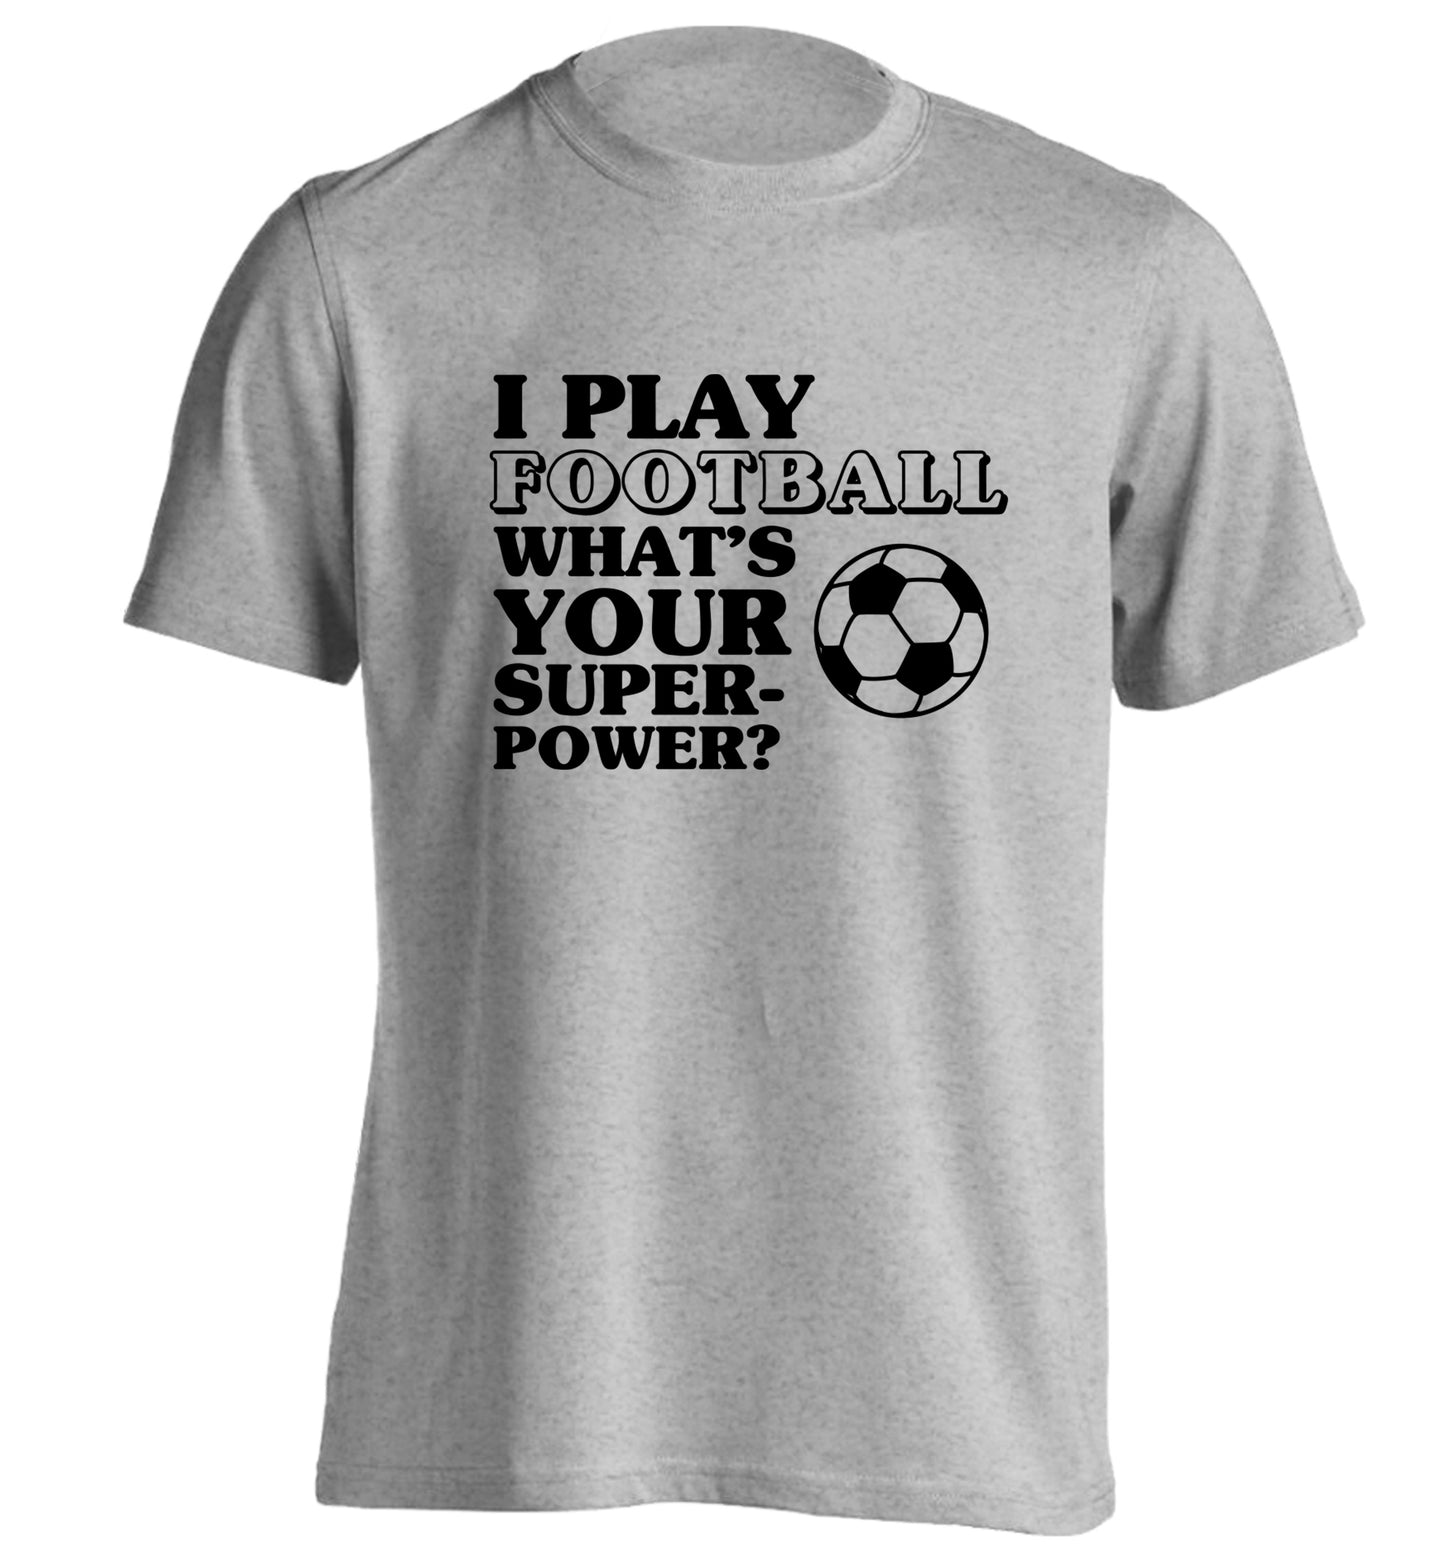 I play football what's your superpower? adults unisexgrey Tshirt 2XL